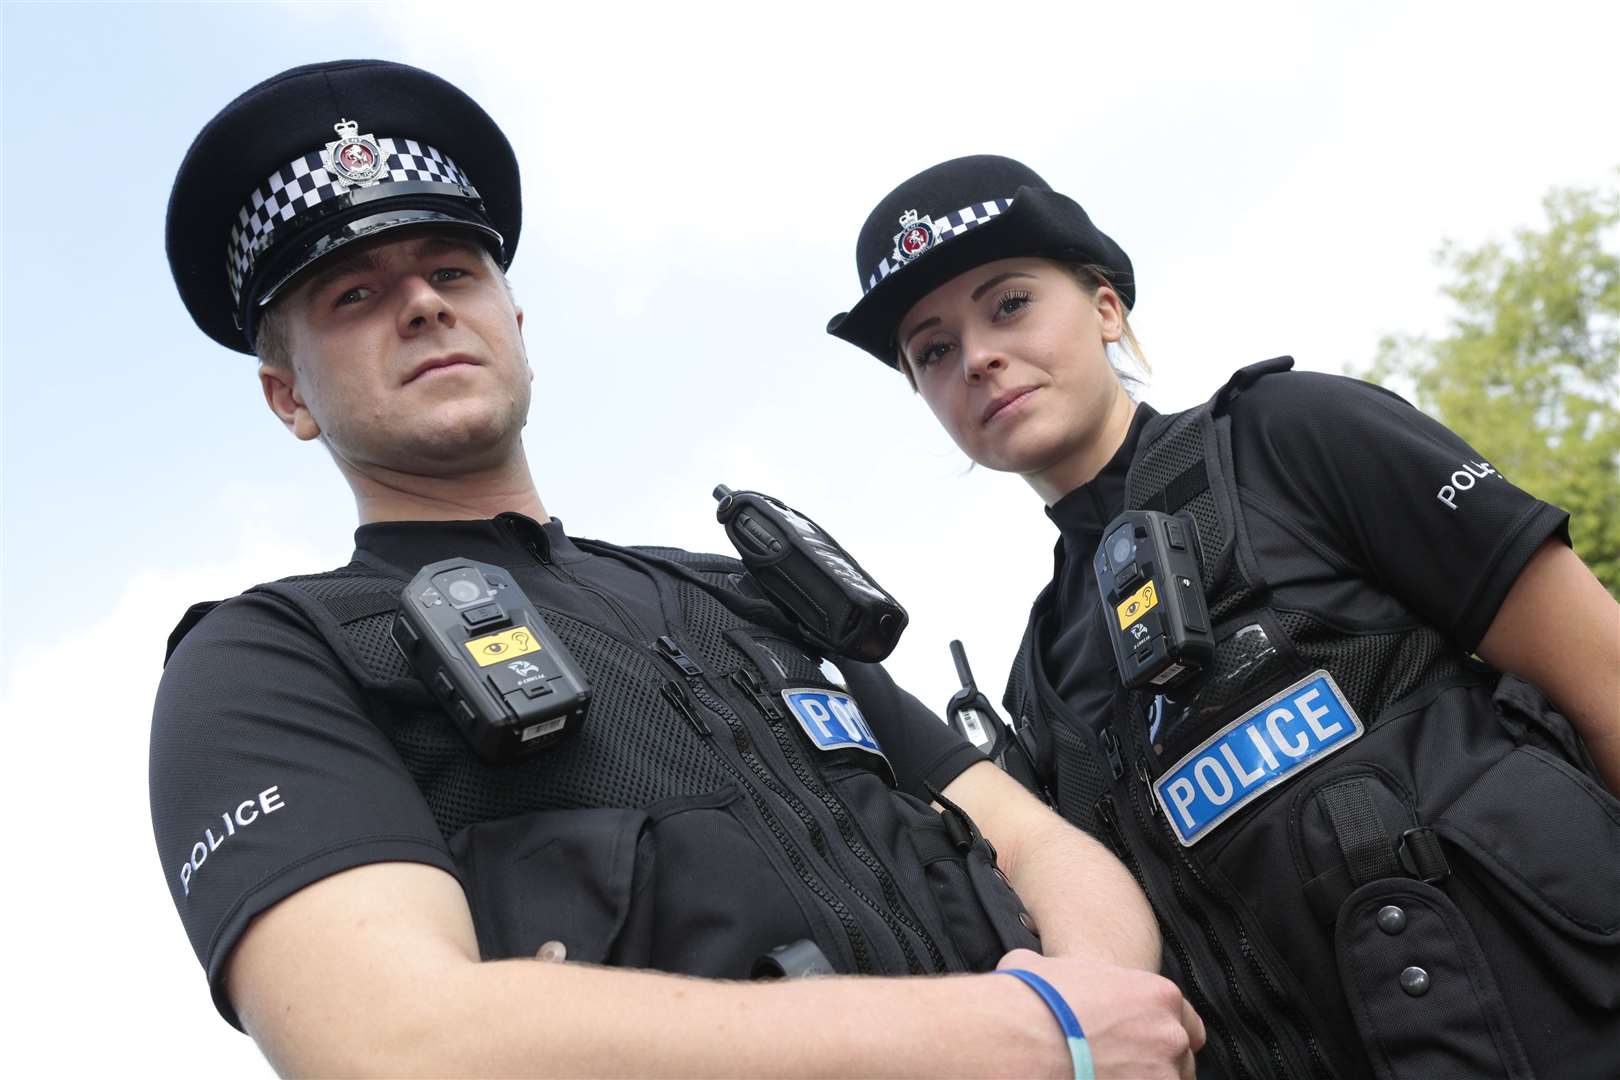 Make sure the officers are genuine - like these two